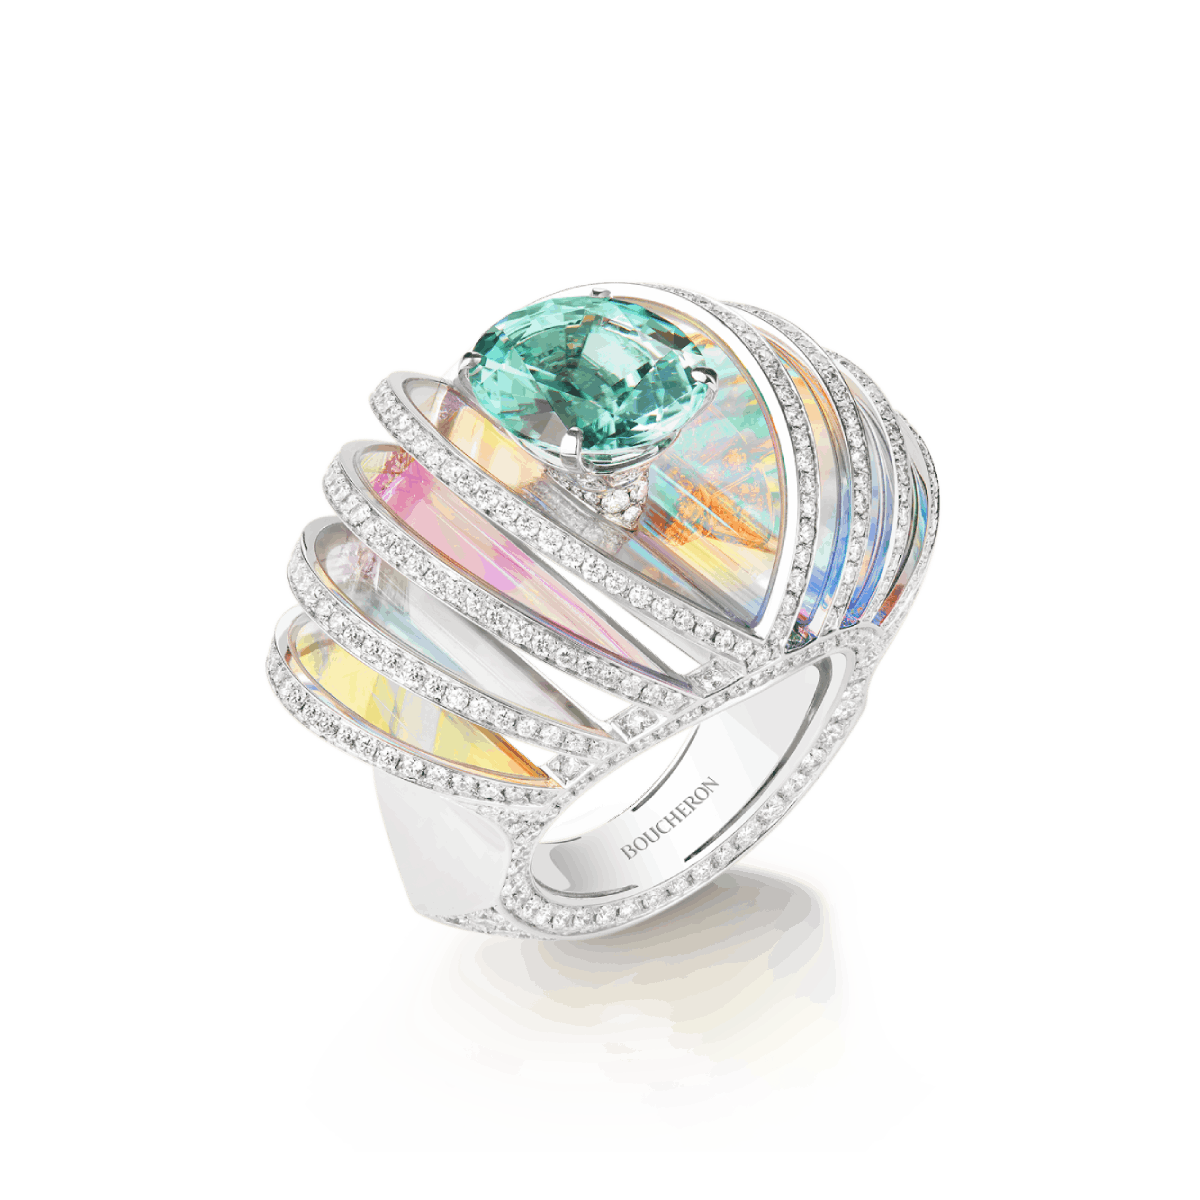 HOLOGRAPHIQUE - Ring set with a 4.61 ct oval blue tourmaline and holographic rock crystal, paved with diamonds, in white gold.